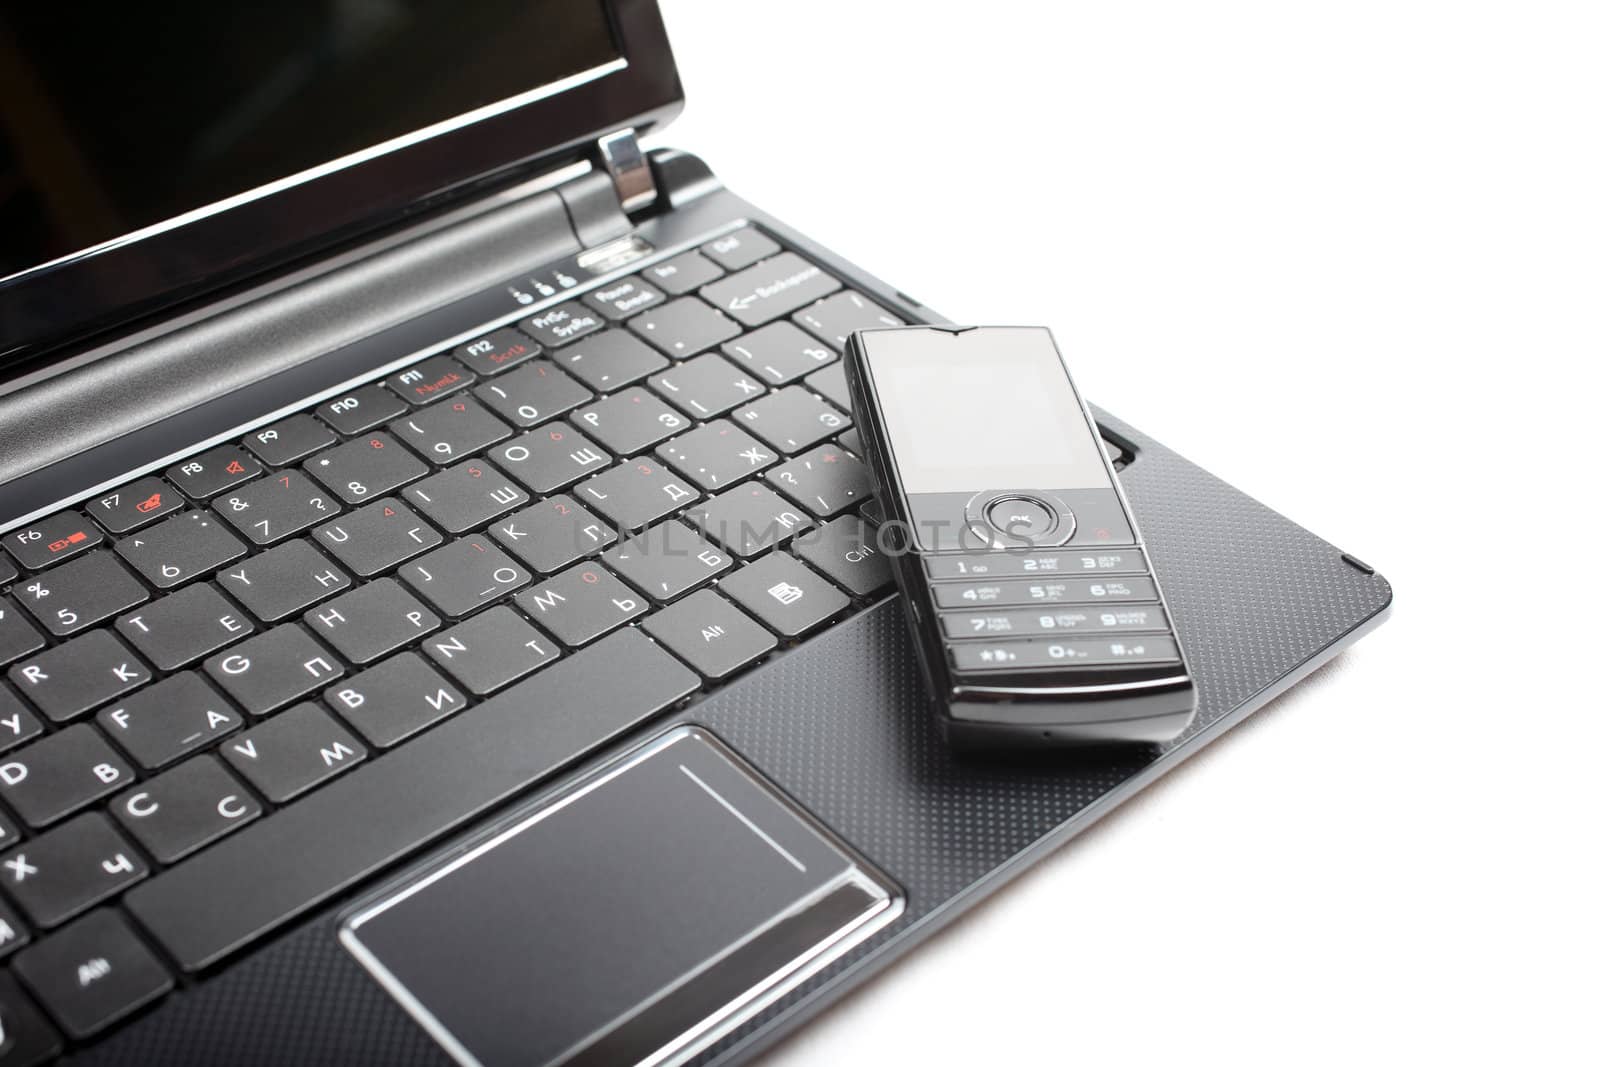 Netbook and mobile phone isolated on the white background.